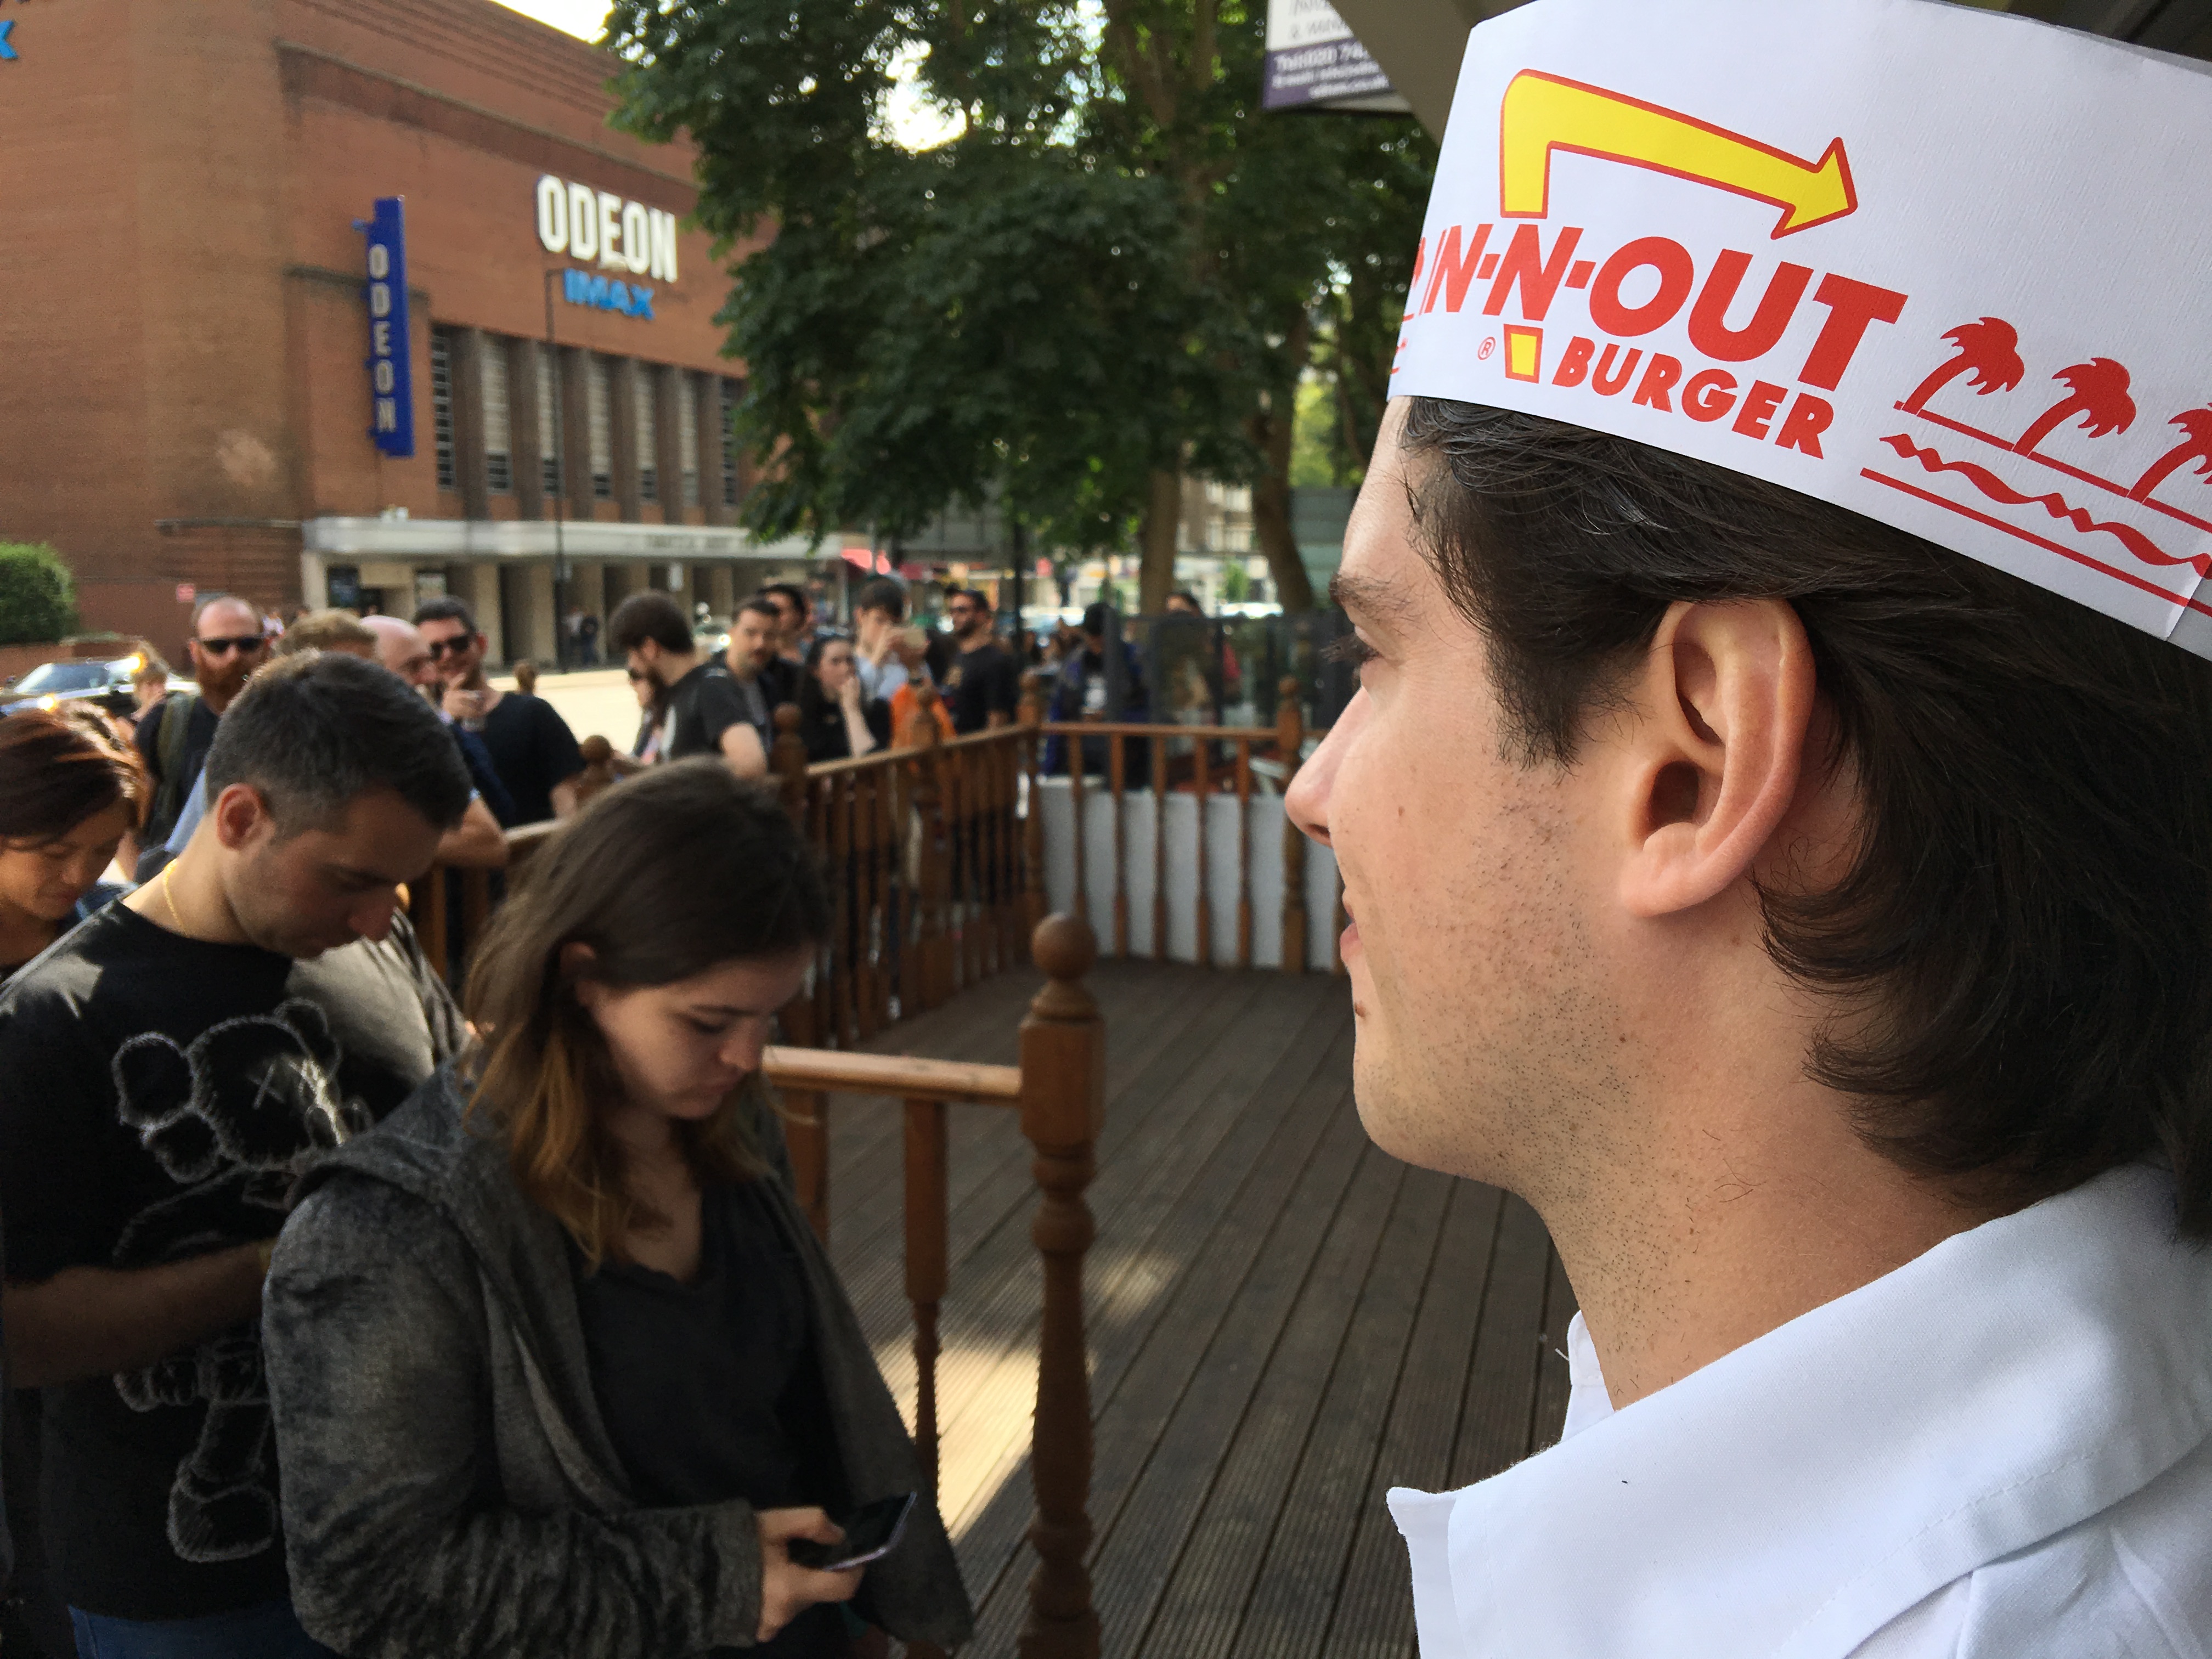 Brits Are Loving In-N-Out Burger